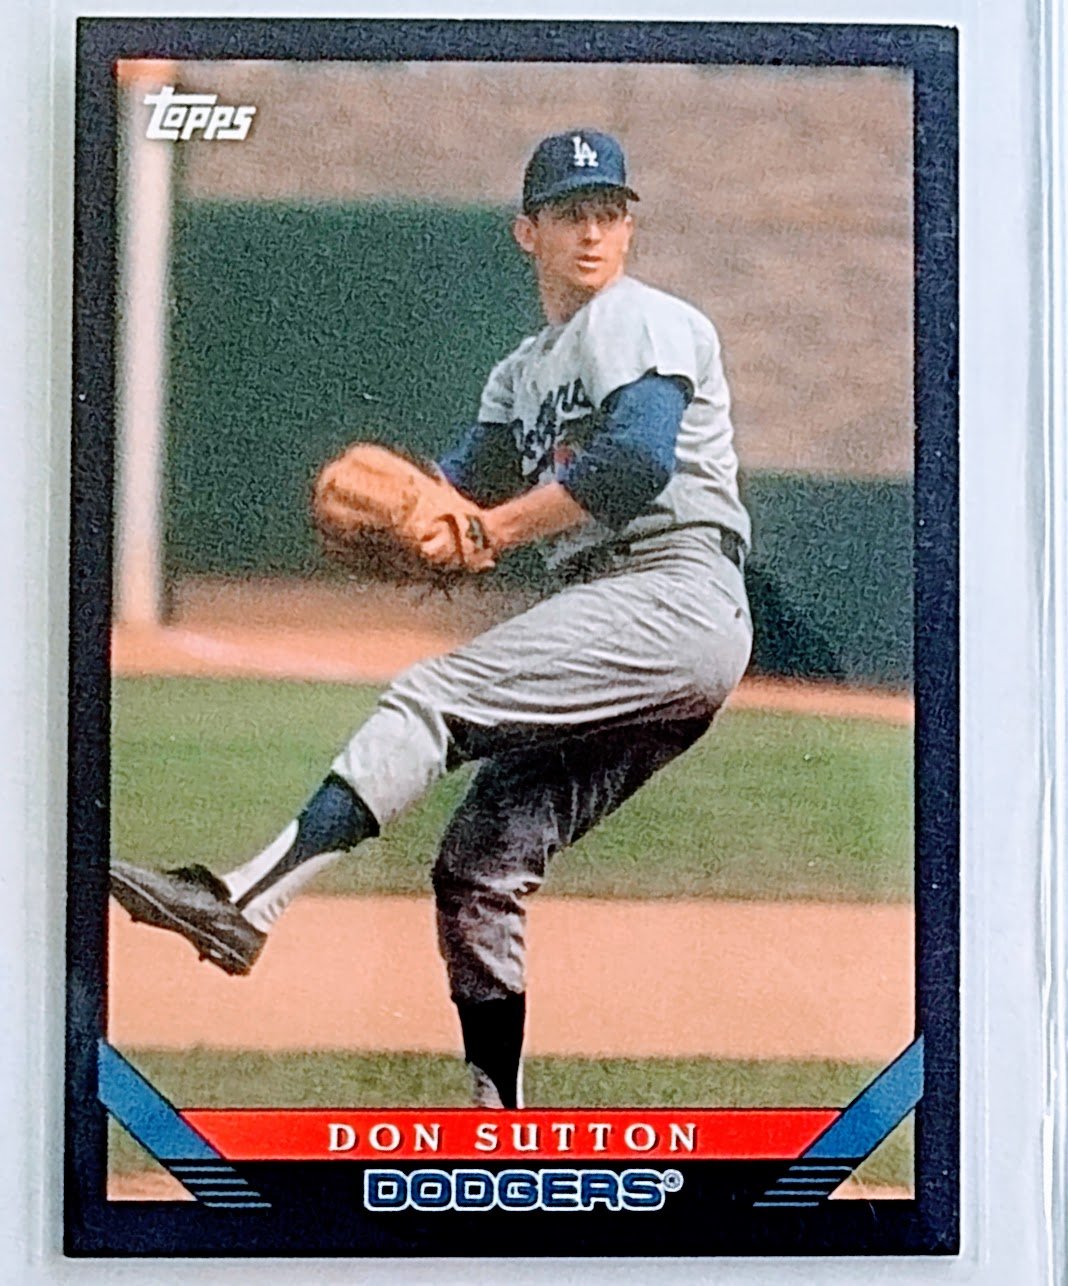 2020 Topps Archive Don Sutton 1993 Black Border Baseball Card TPTV simple Xclusive Collectibles   